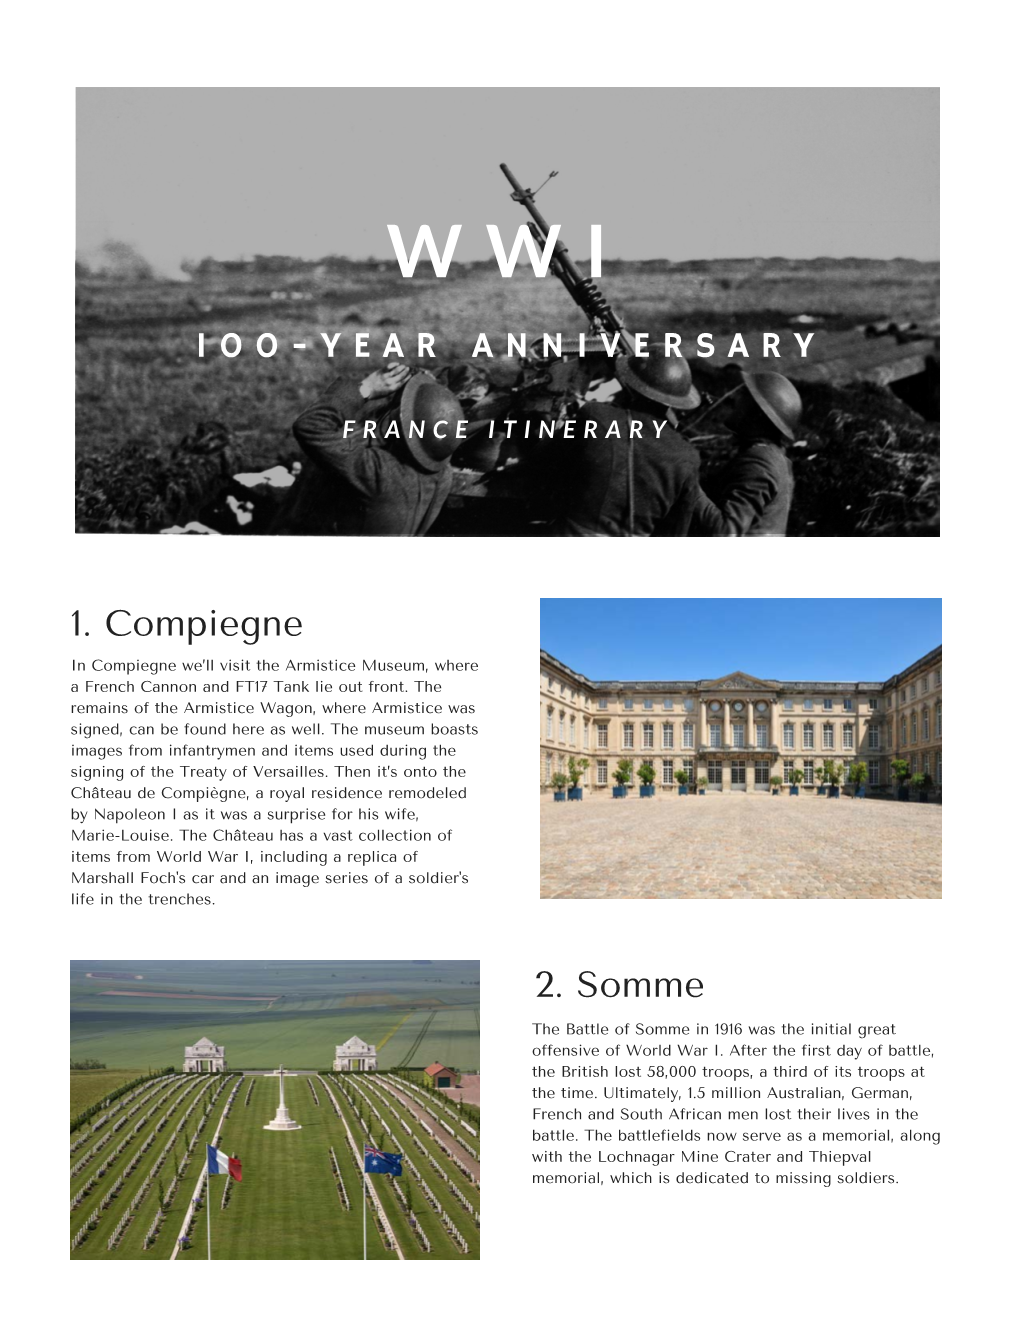 WWI 100 Year Anniversary | Group Itinerary | Europe Express